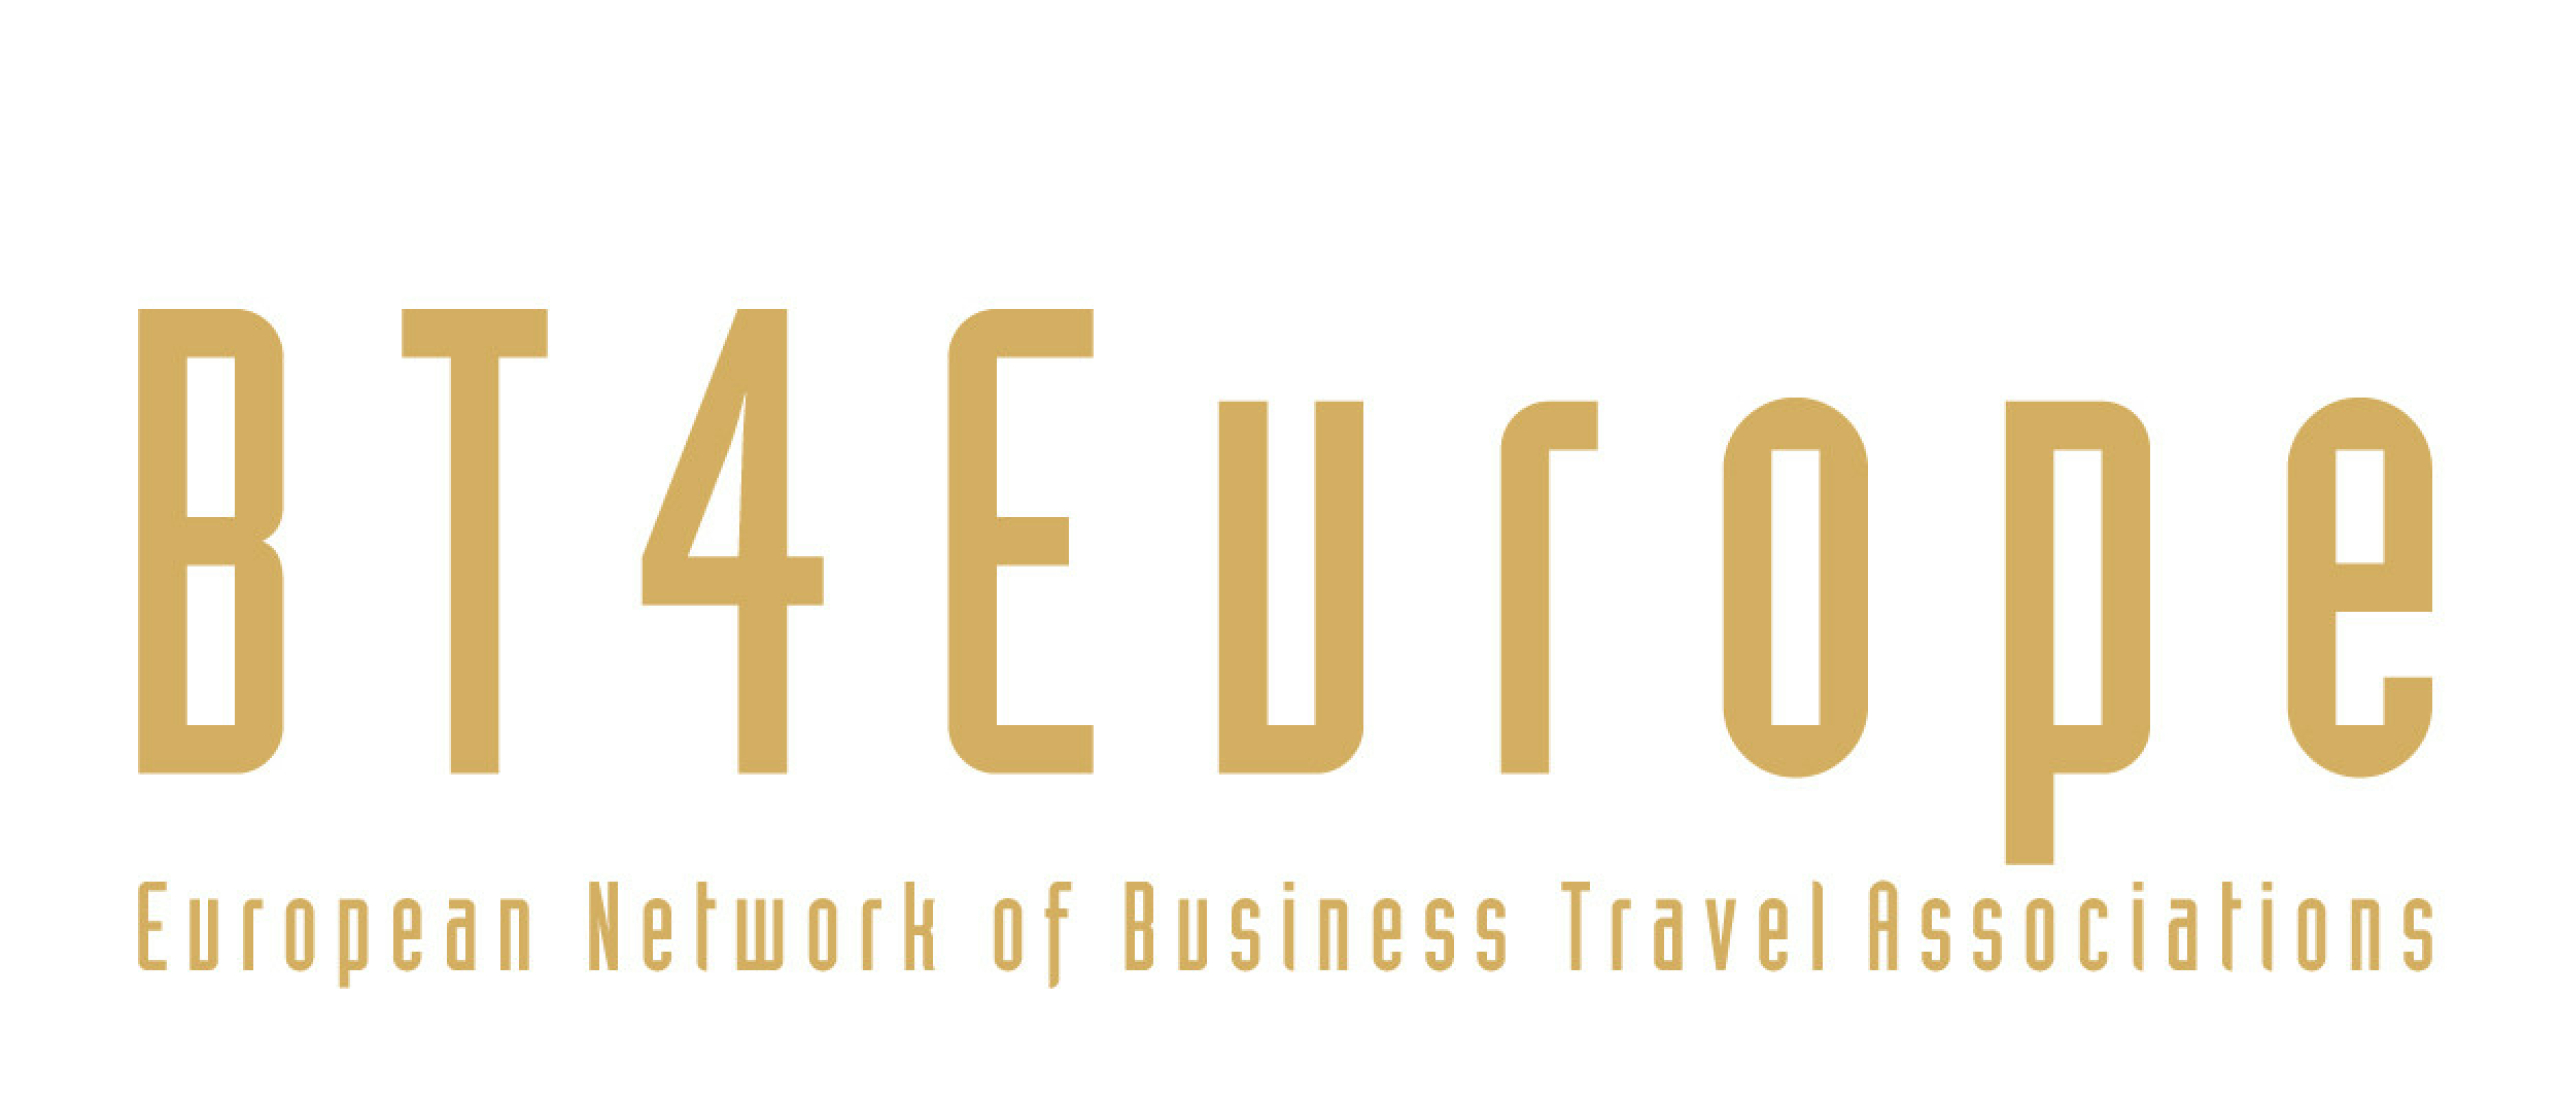 Press Release: Business Travel Frustrated with Europe’s Long To-Do List